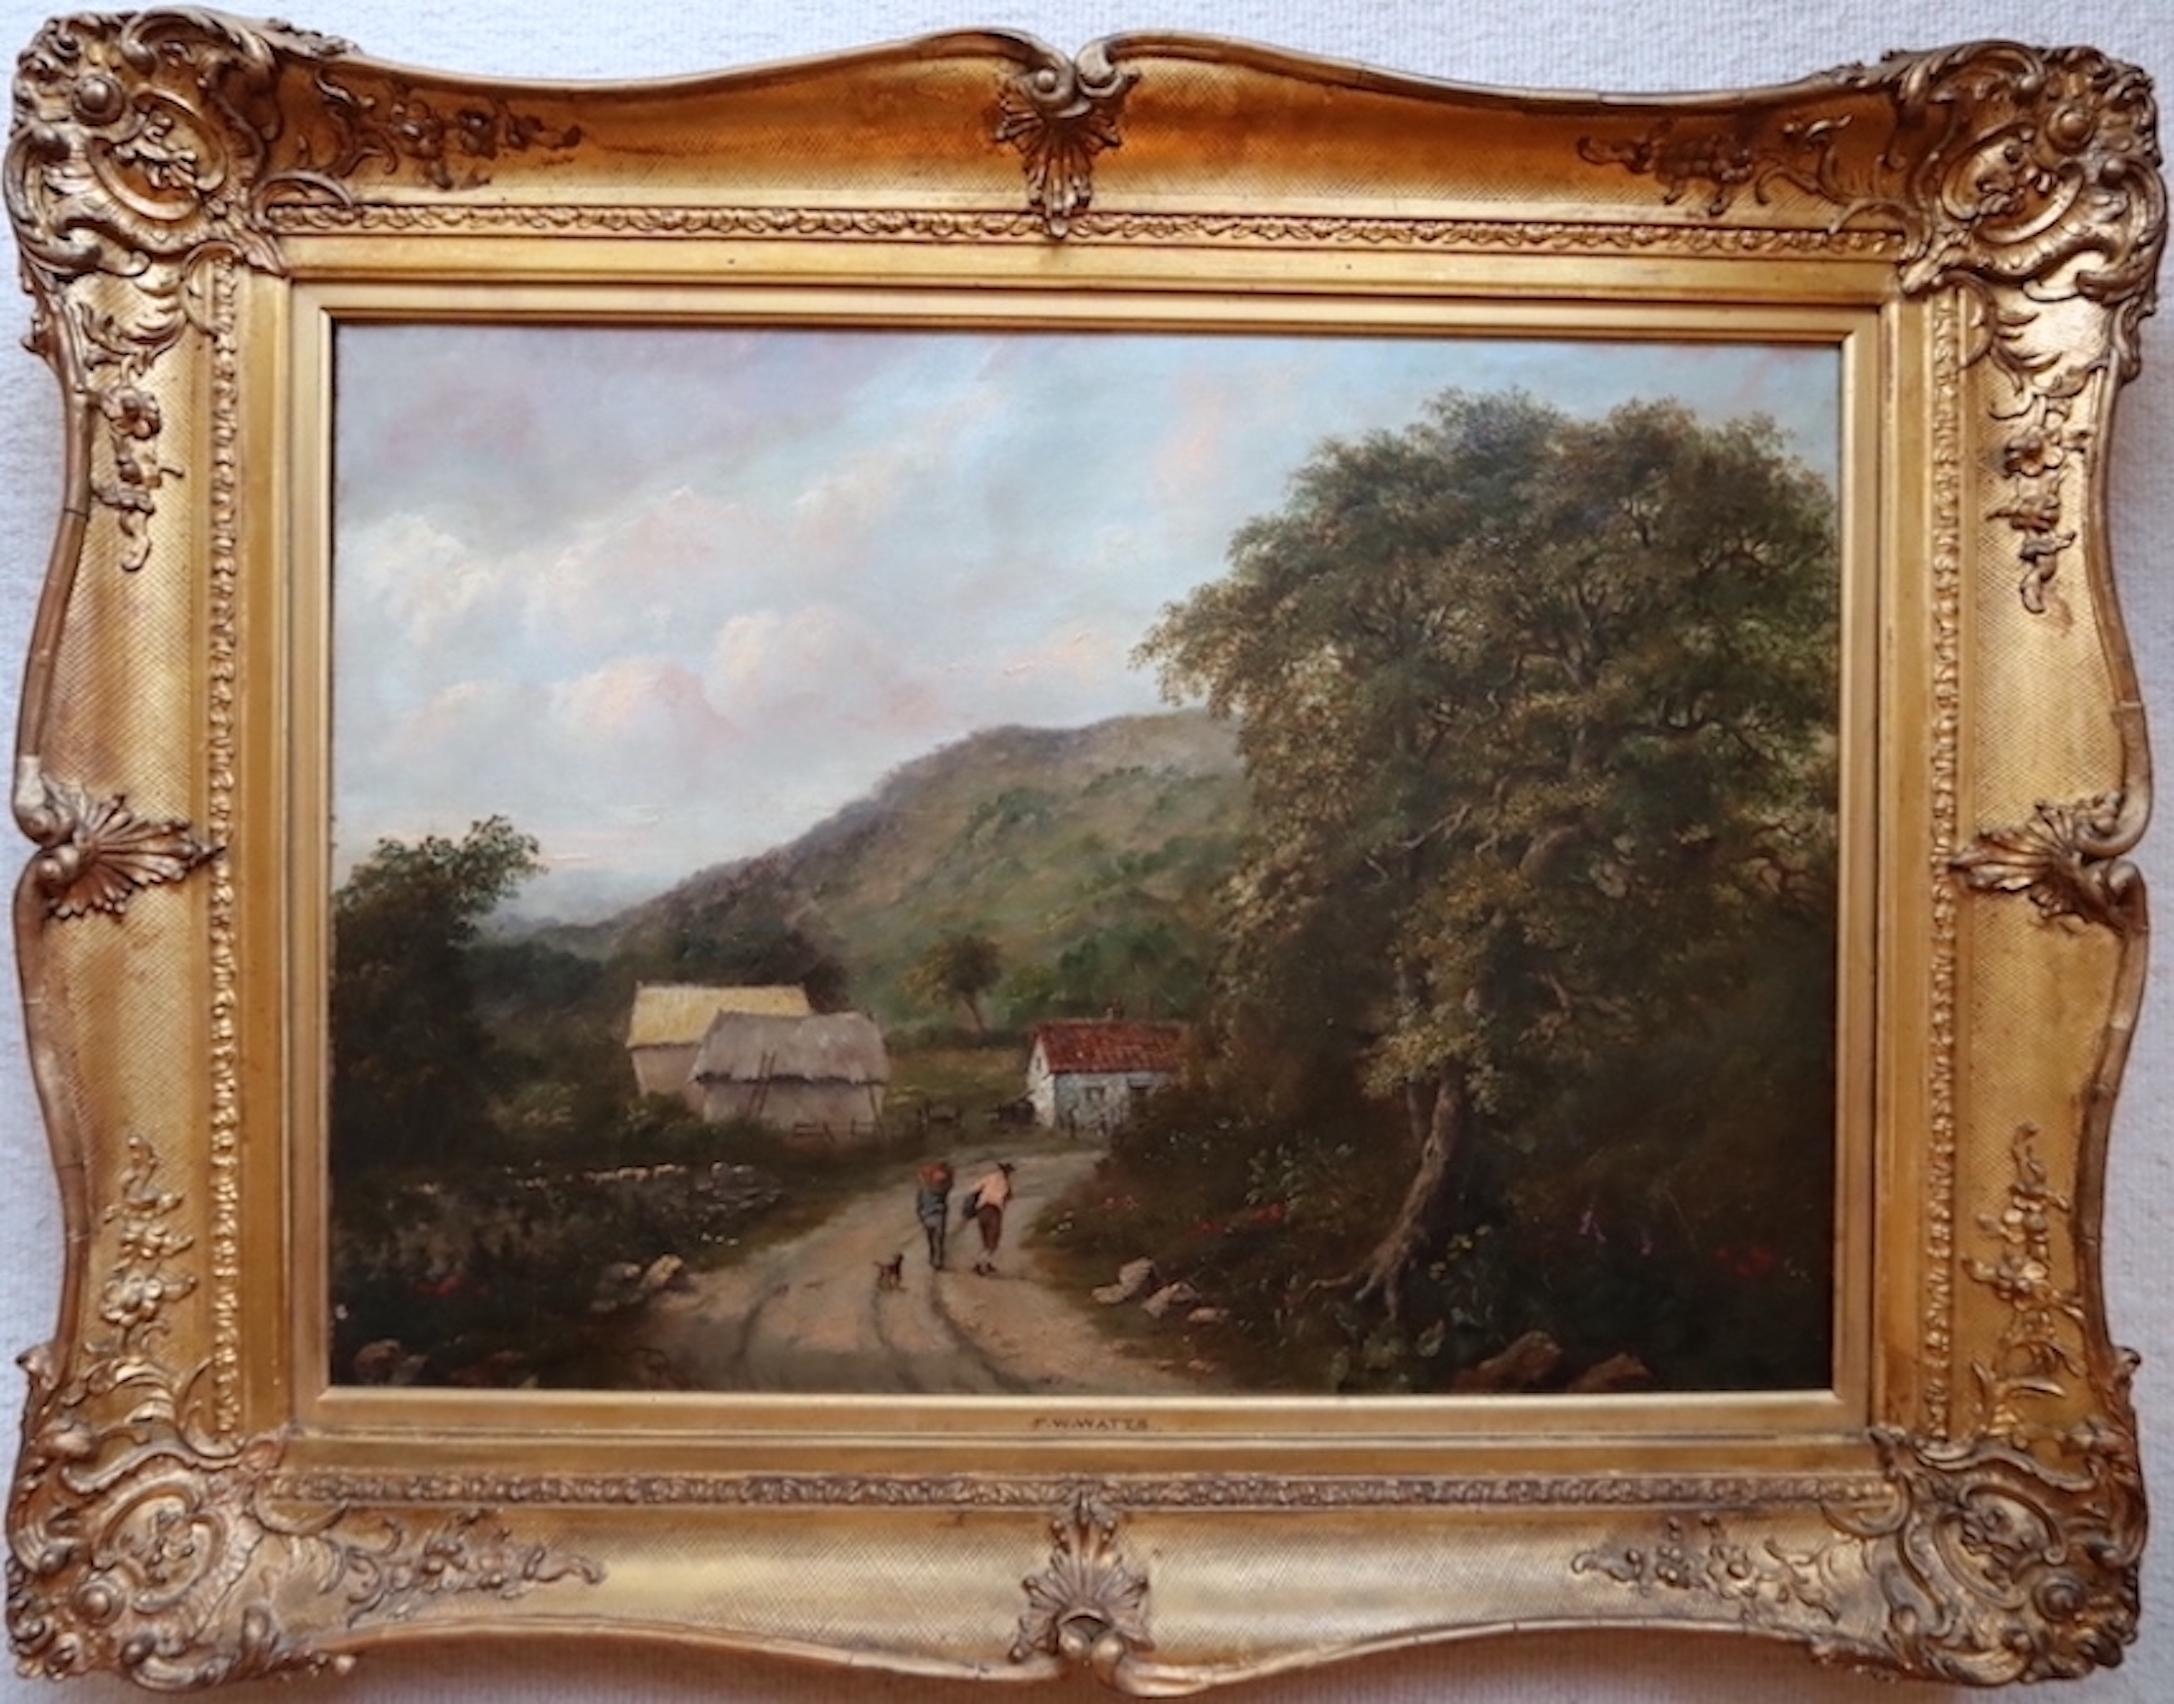 A beautifully painted landscape depicting an old country road, and a working duo out for a walk with their pooch by Frederick Waters Watts, Oil on Canvas, 31” x 27” framed. Original period frame included.

Frederick W. Watts (7 October 1800 – 4 July